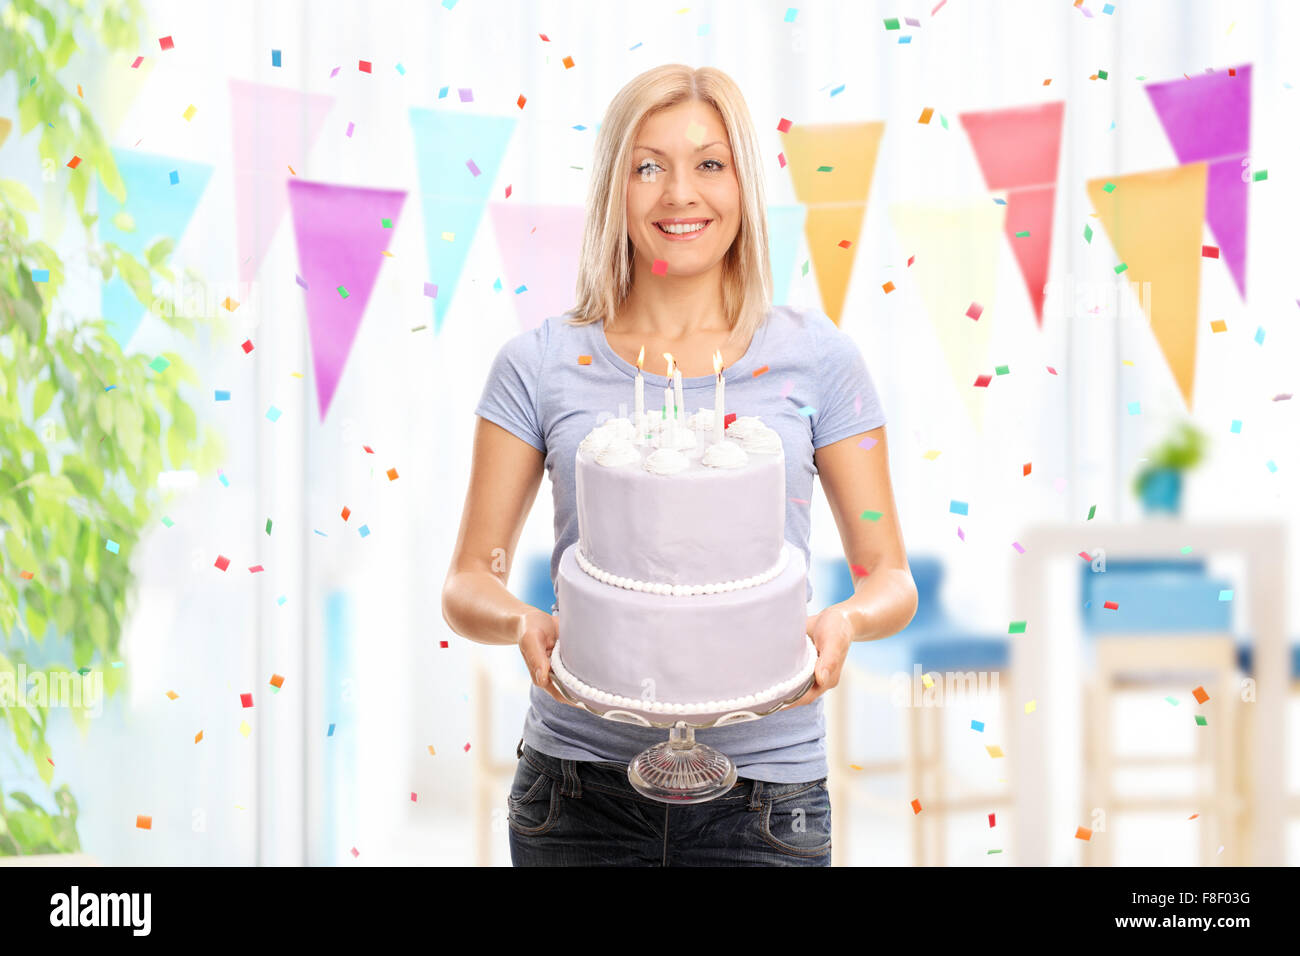 Cheerful young woman holding a birthday cake and looking at the camera at homed Stock Photo